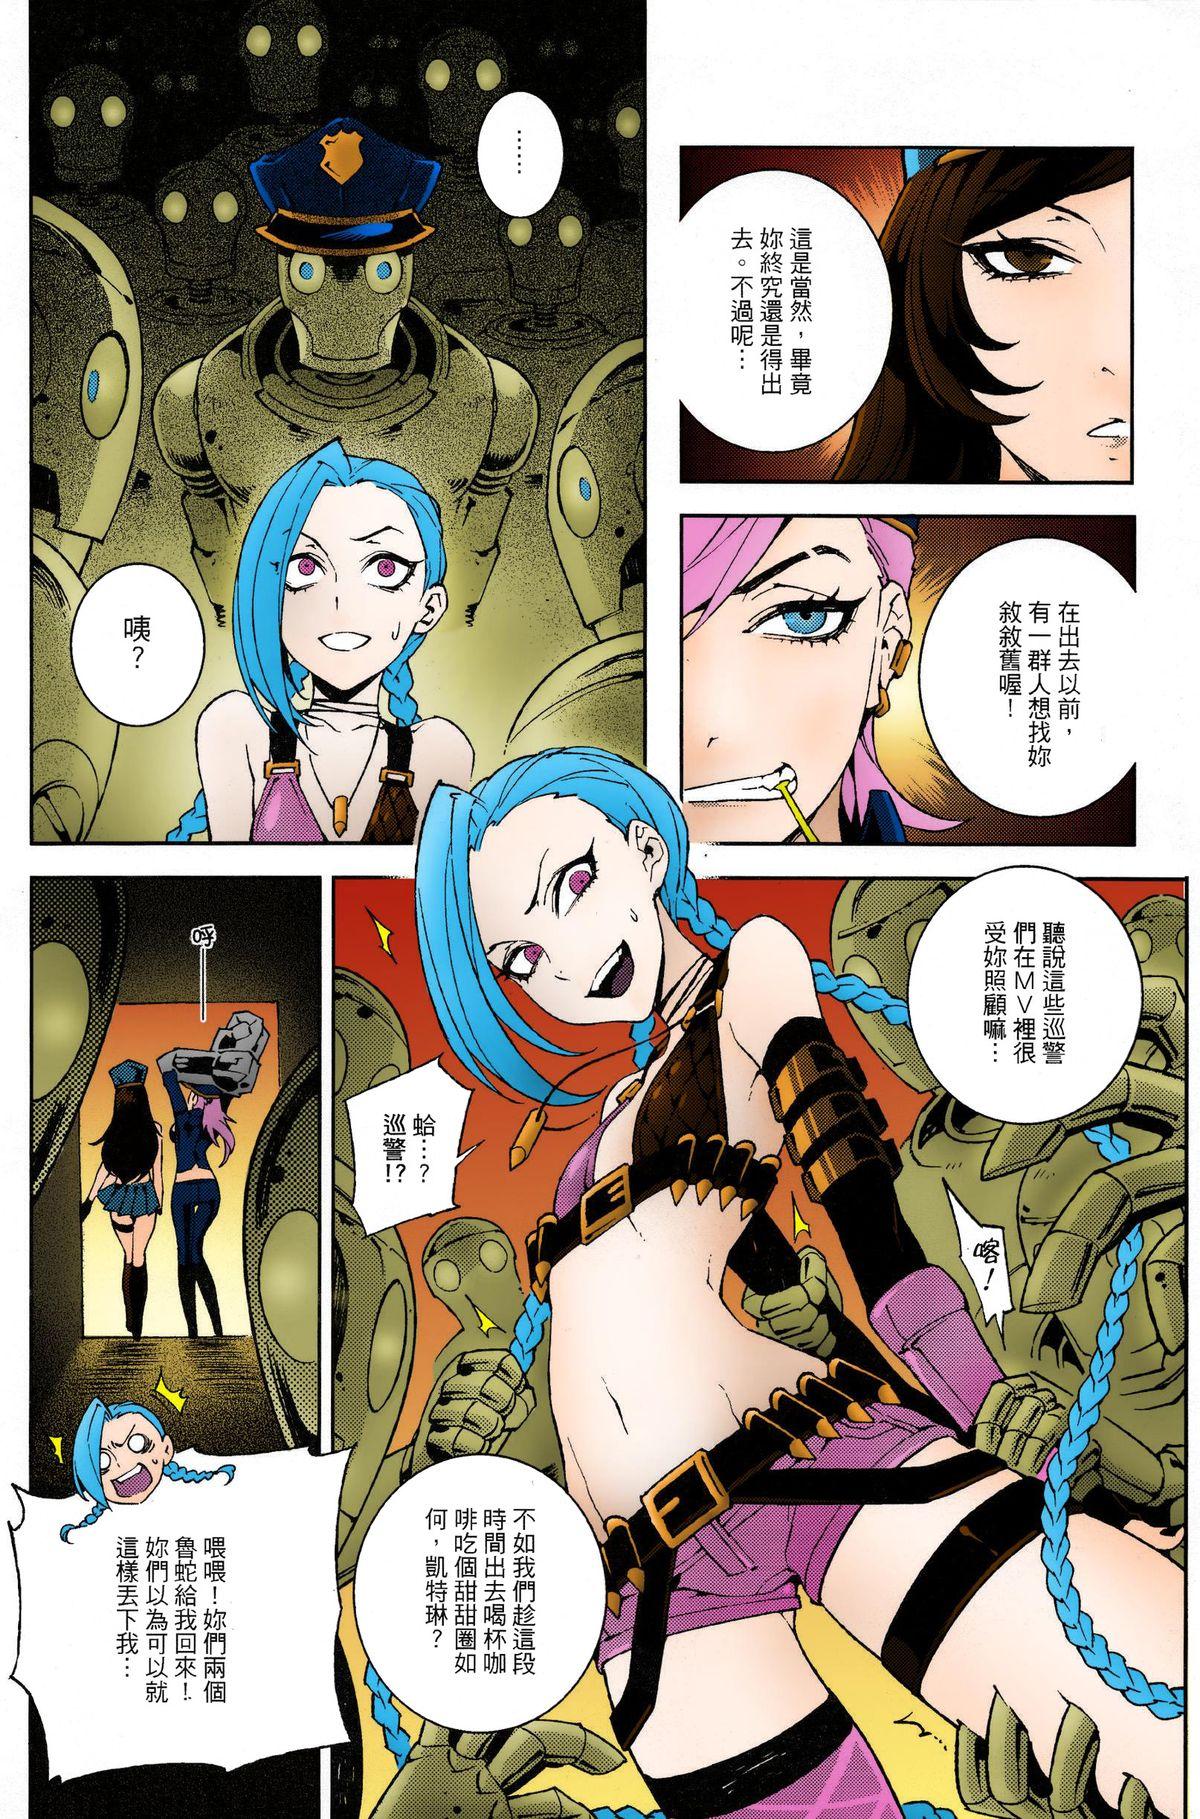 Free Blow Job JINX Come On! Shoot Faster - League of legends Calcinha - Page 5